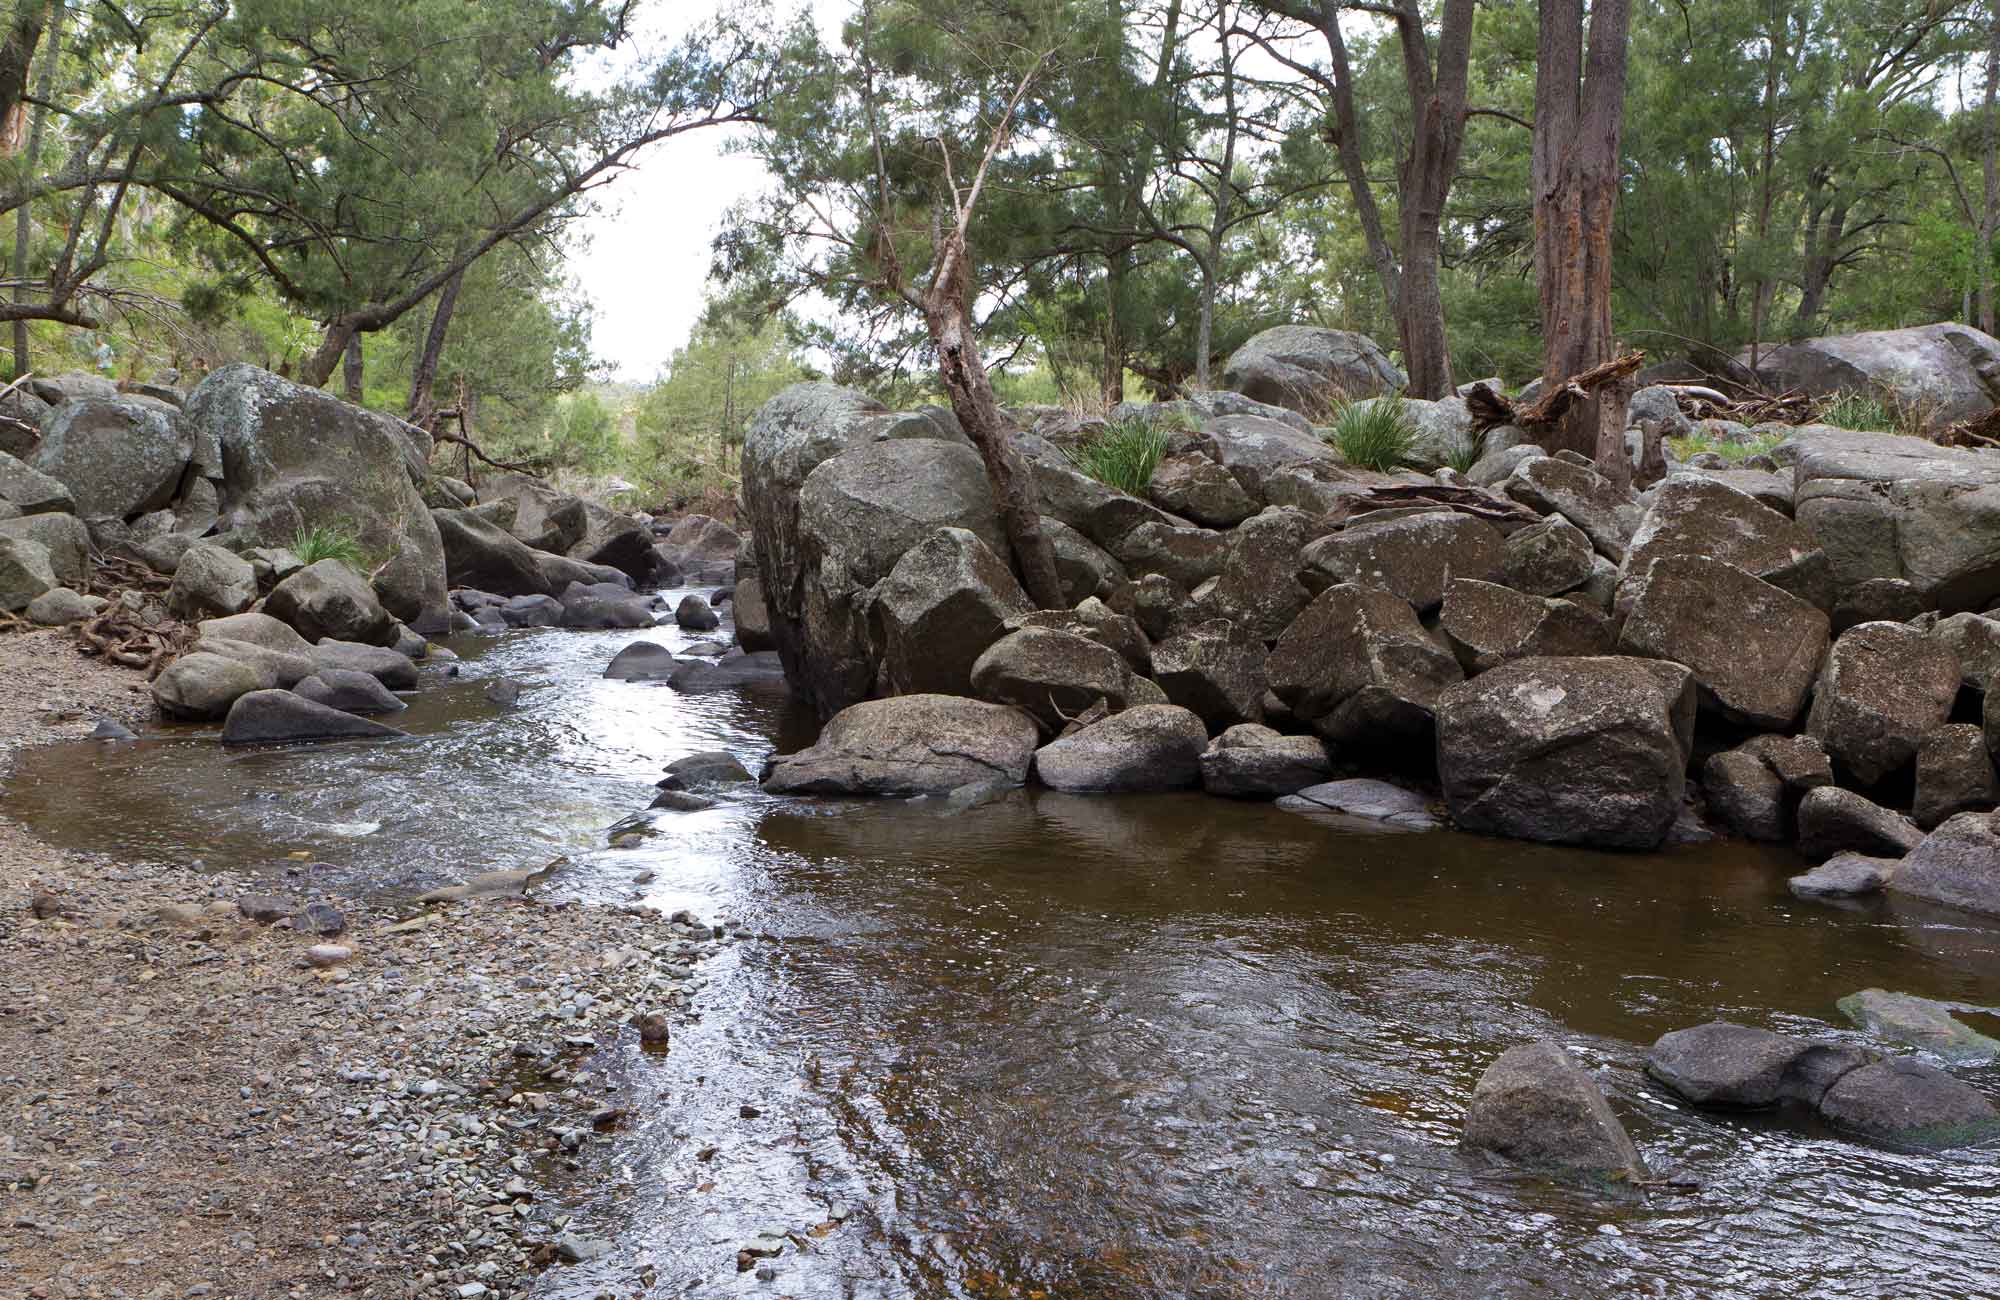 Threlfall walking track hero, Oxley Wild River National Park. Photo: Rob Cleary